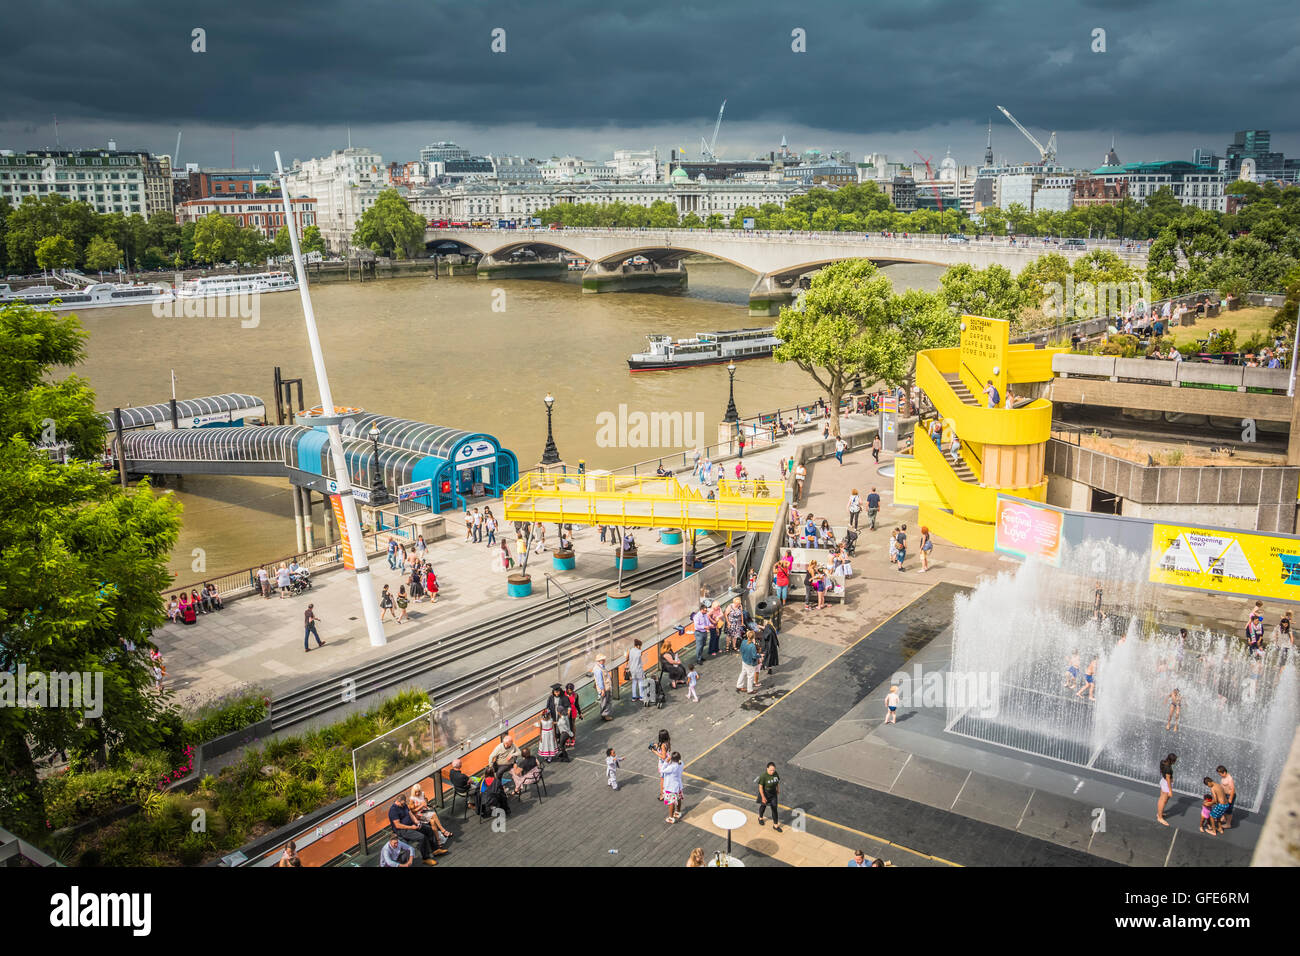 Children playing in the Appearing Rooms fountains on the Southbank, London, UK Stock Photo